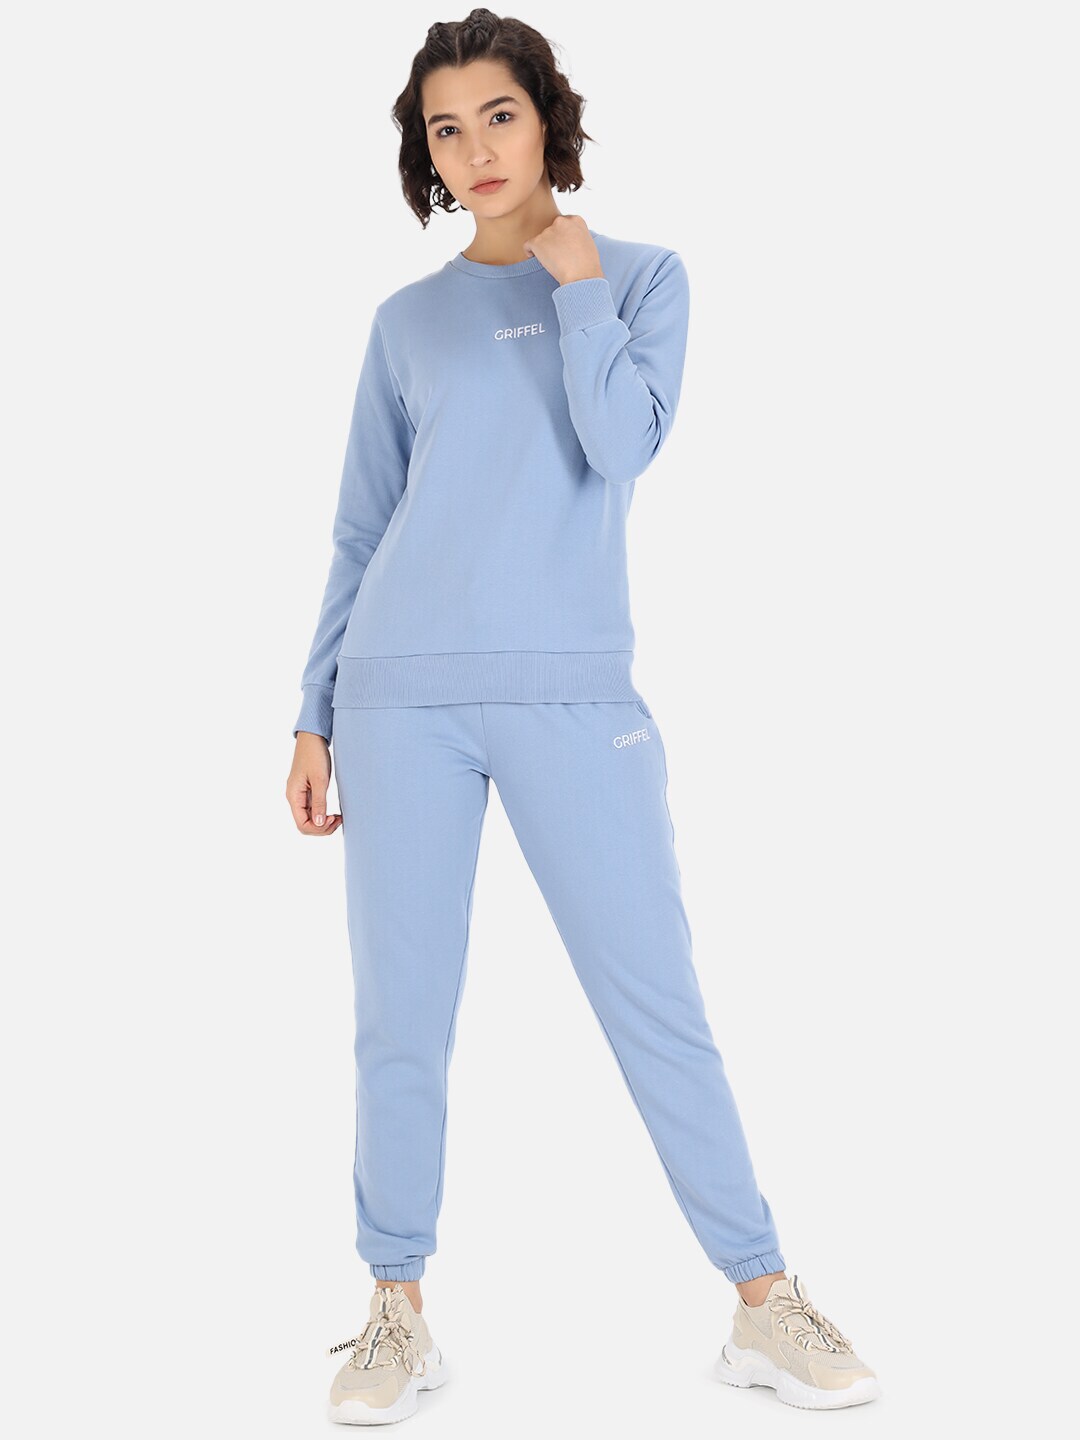 GRIFFEL Women Blue Solid Cotton Tracksuit Price in India